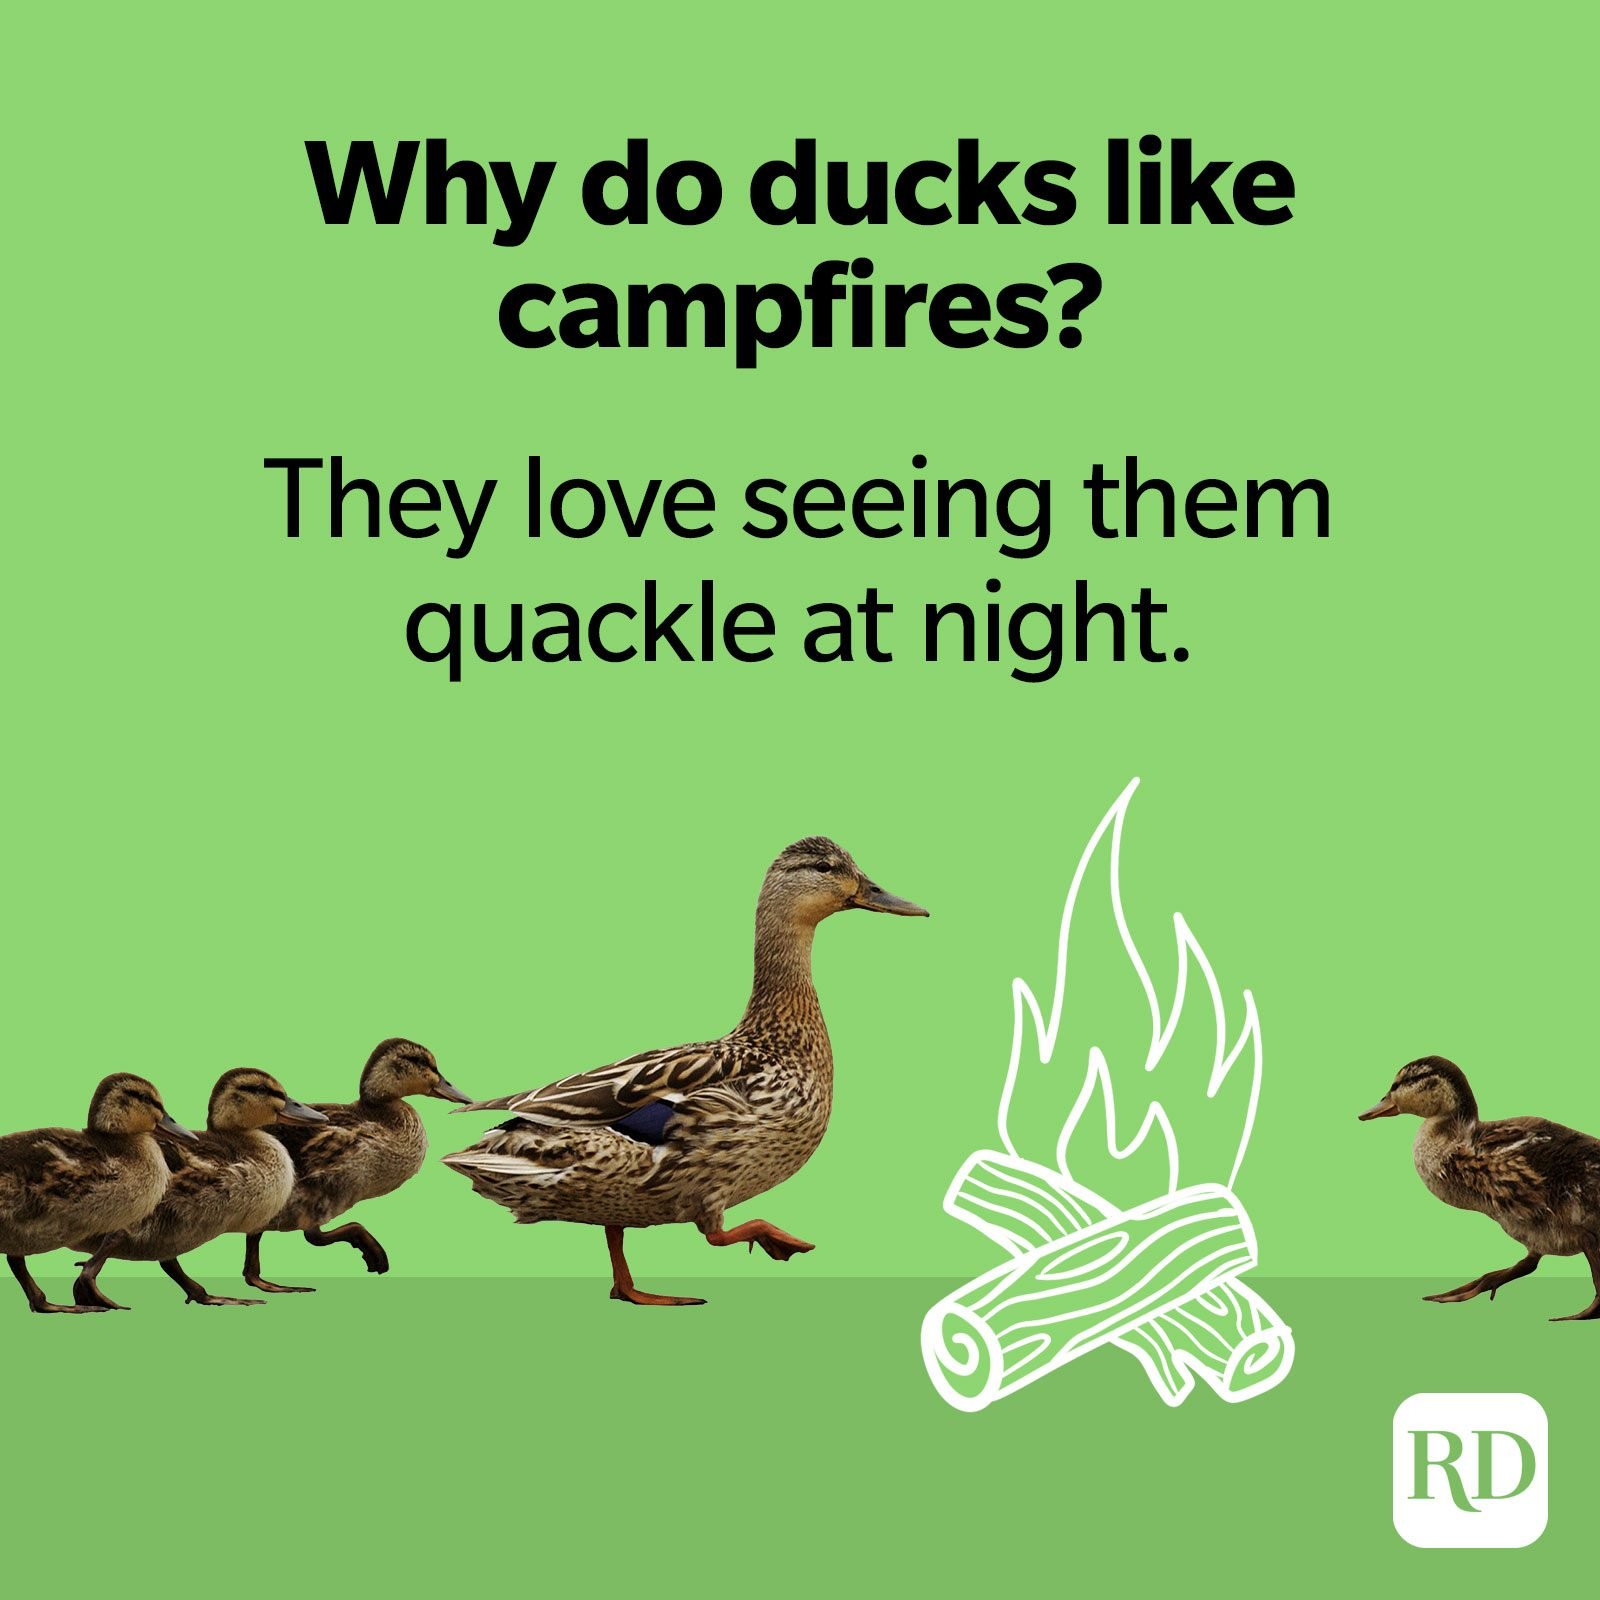 32. Why do ducks like campfires? They love seeing them quackle at night.